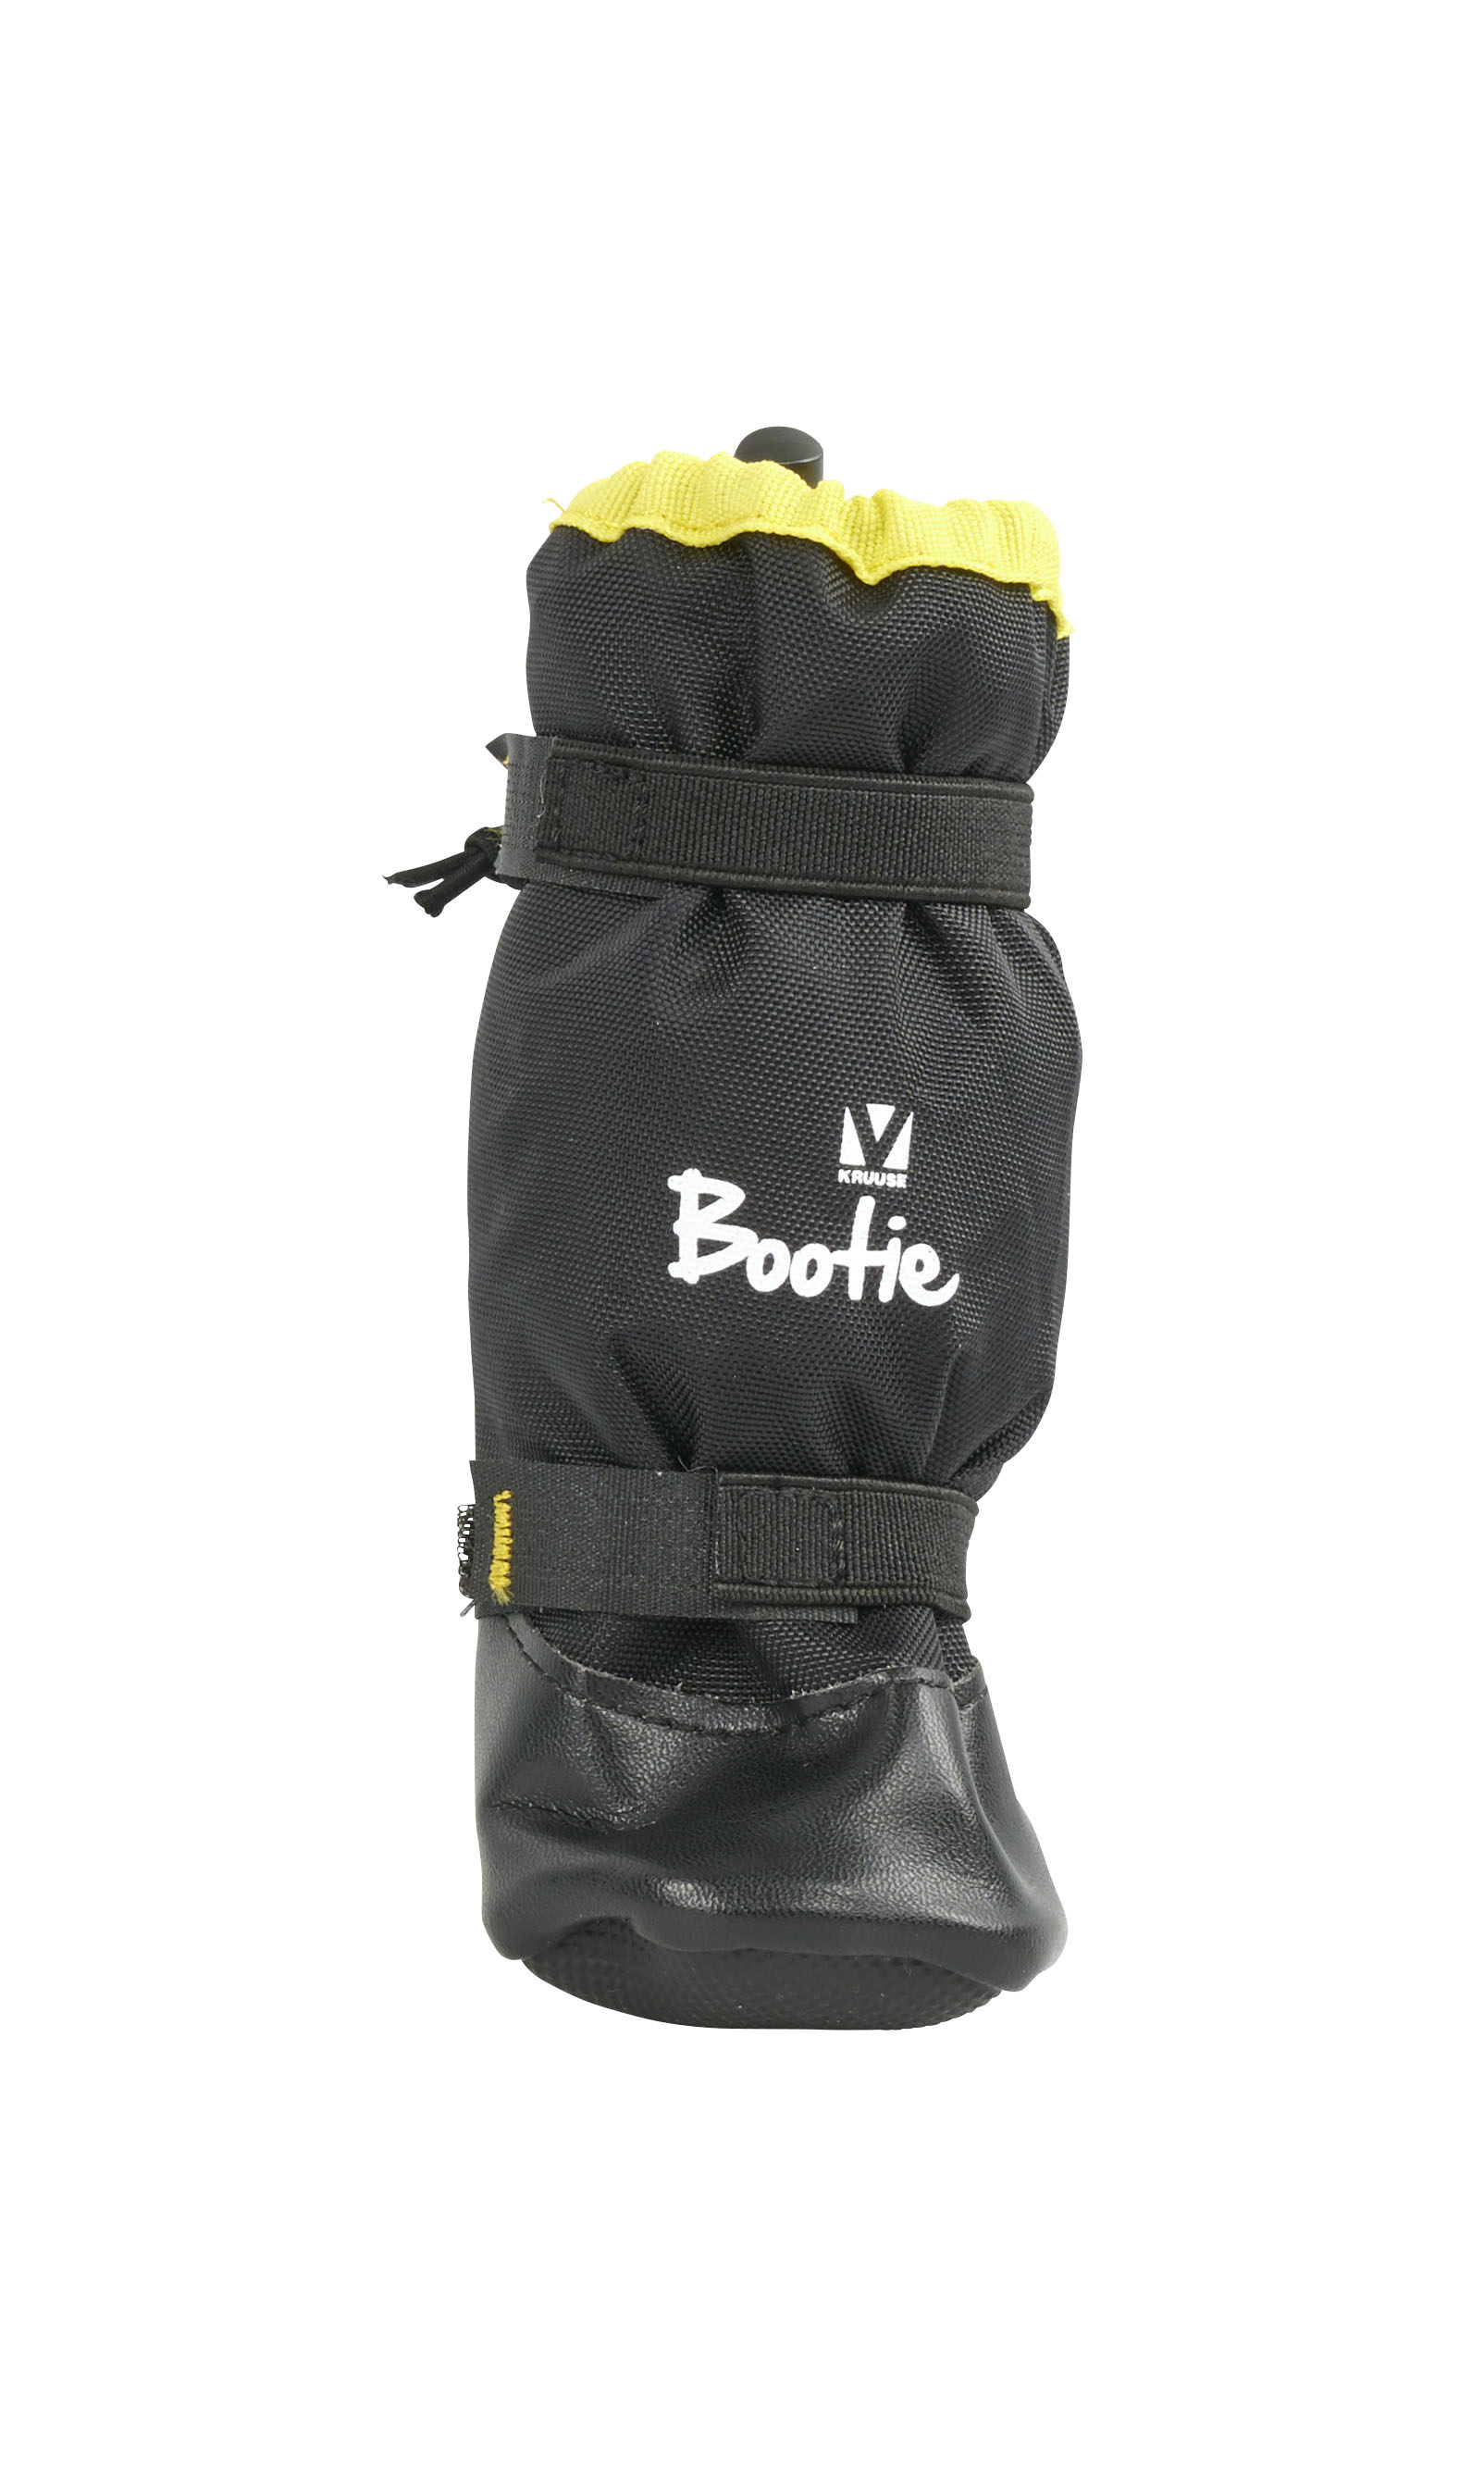 BUSTER Bootie Soft sole - XS, yellow